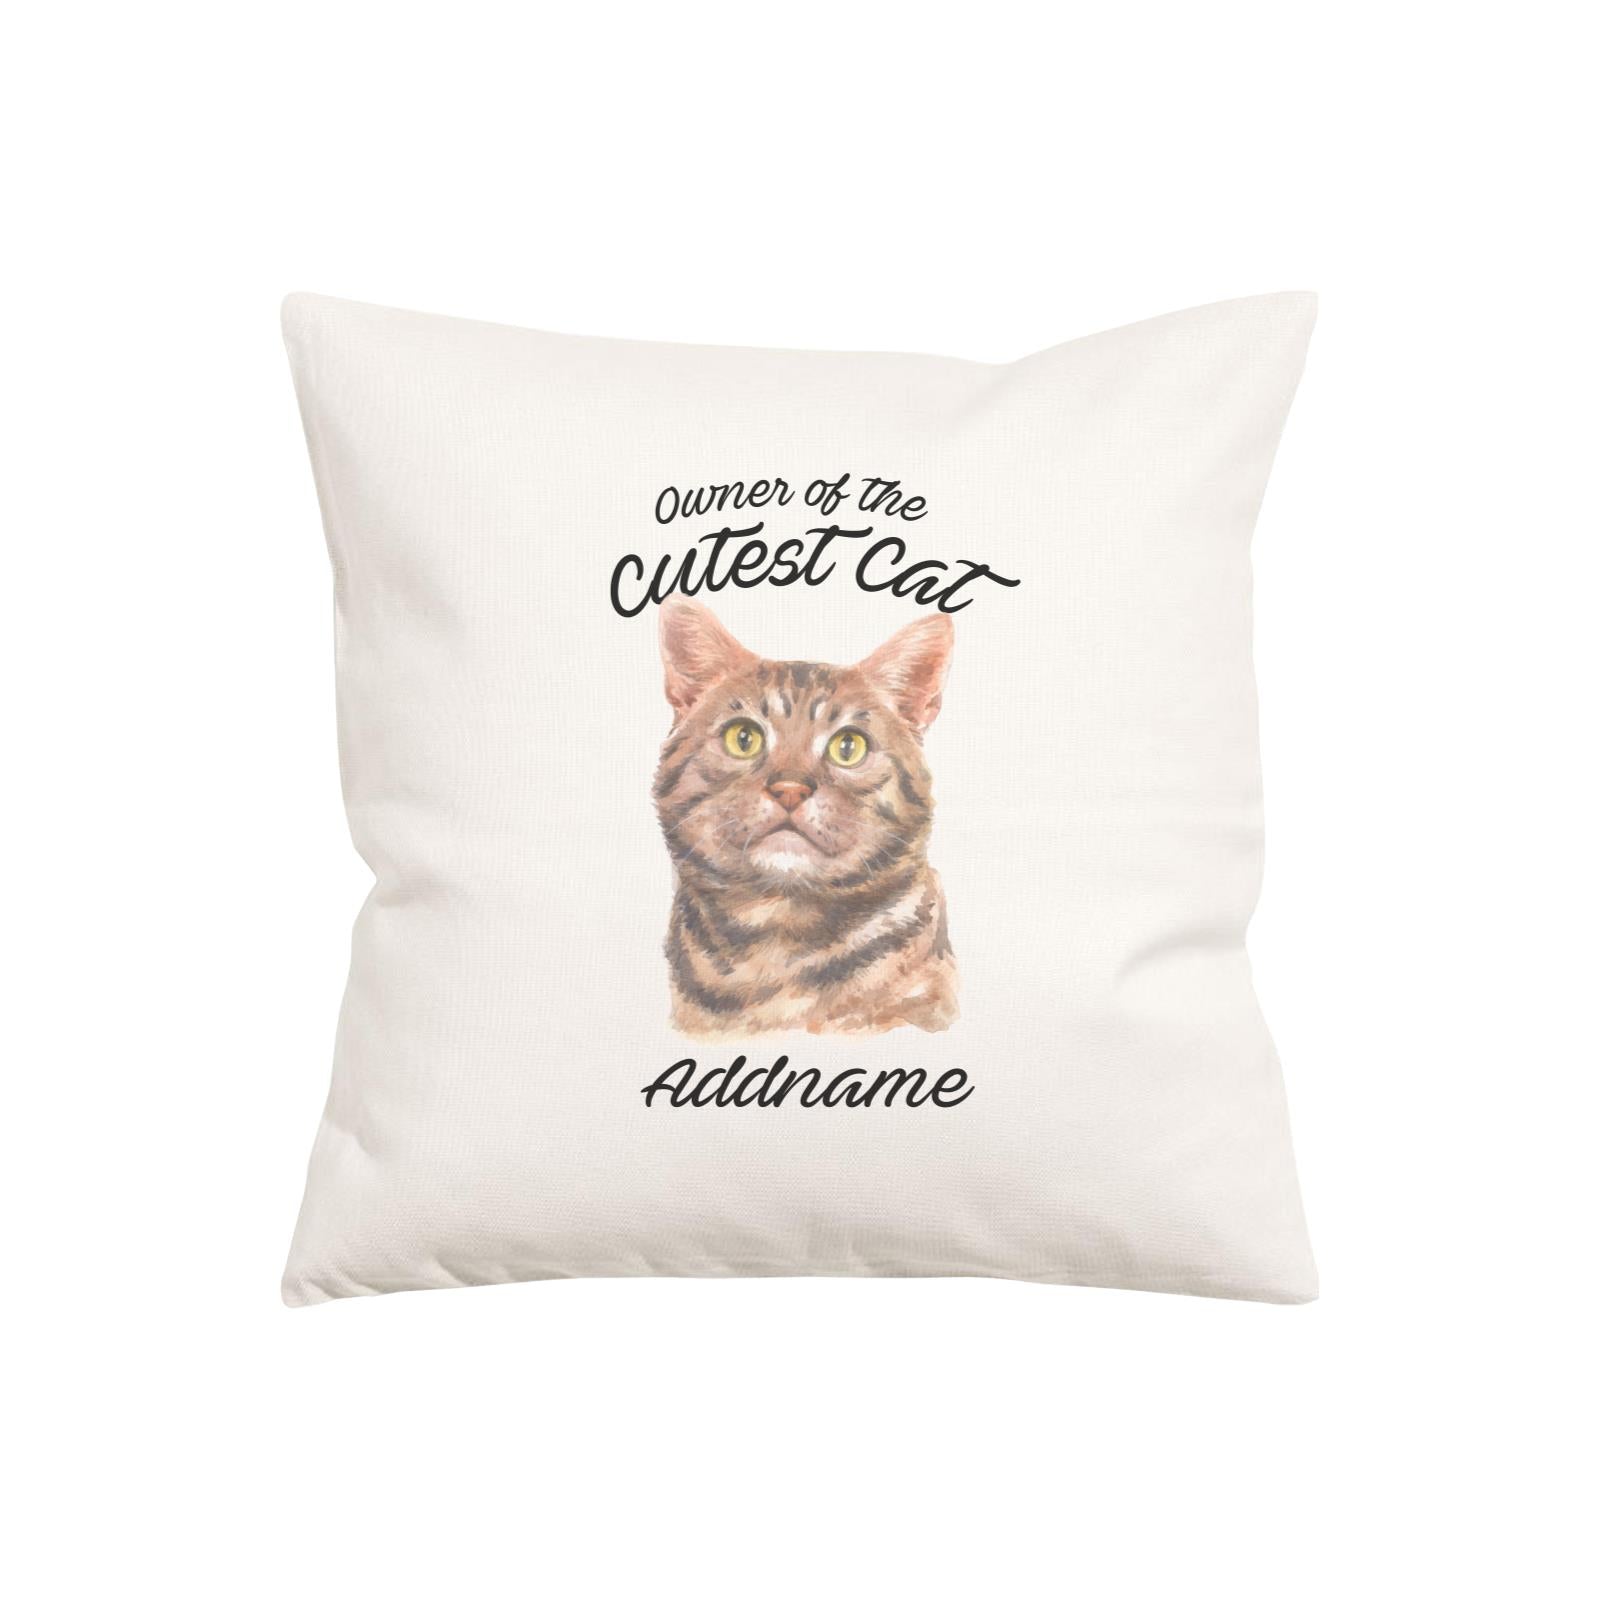 Watercolor Owner Of The Cutest Cat American Shorthair Addname Pillow Cushion